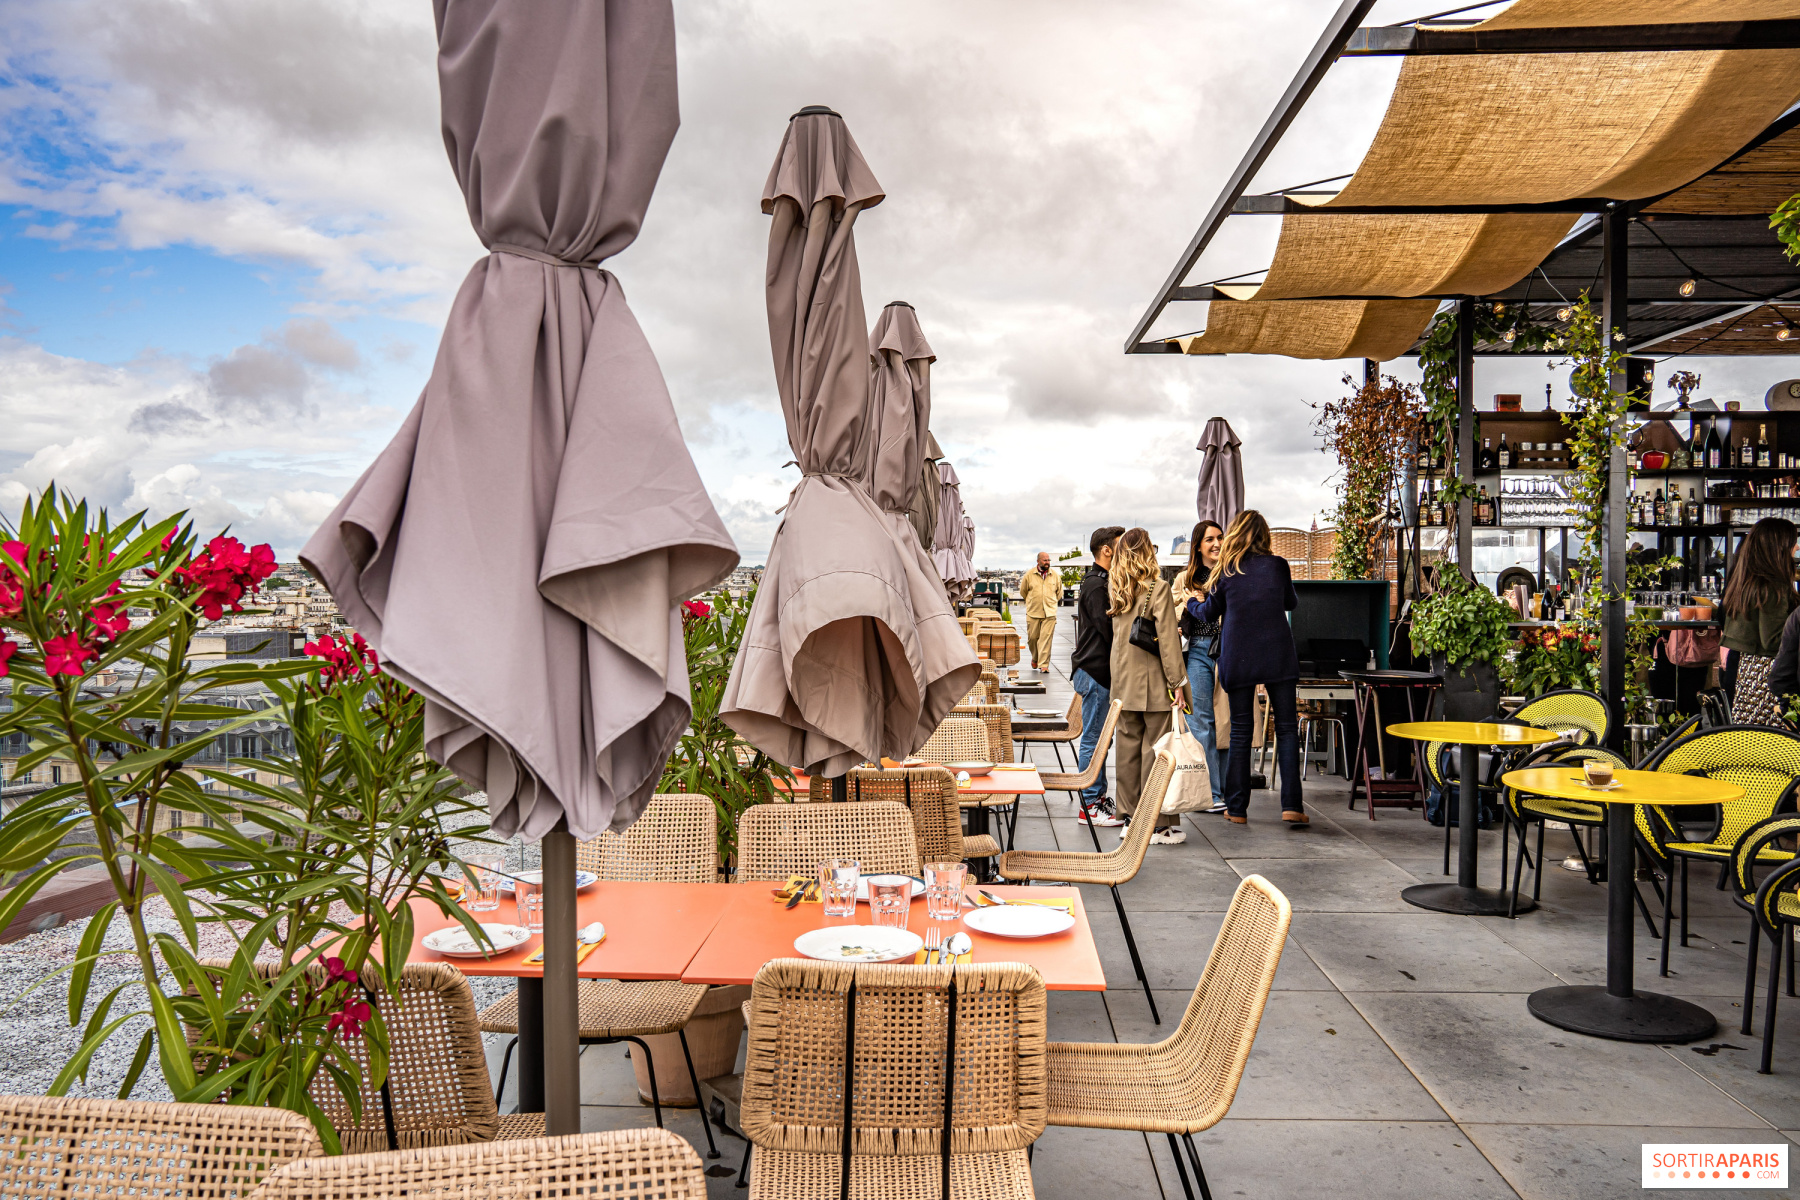 See How This Rooftop Restaurant in Paris Pulls Out All the Design Stops